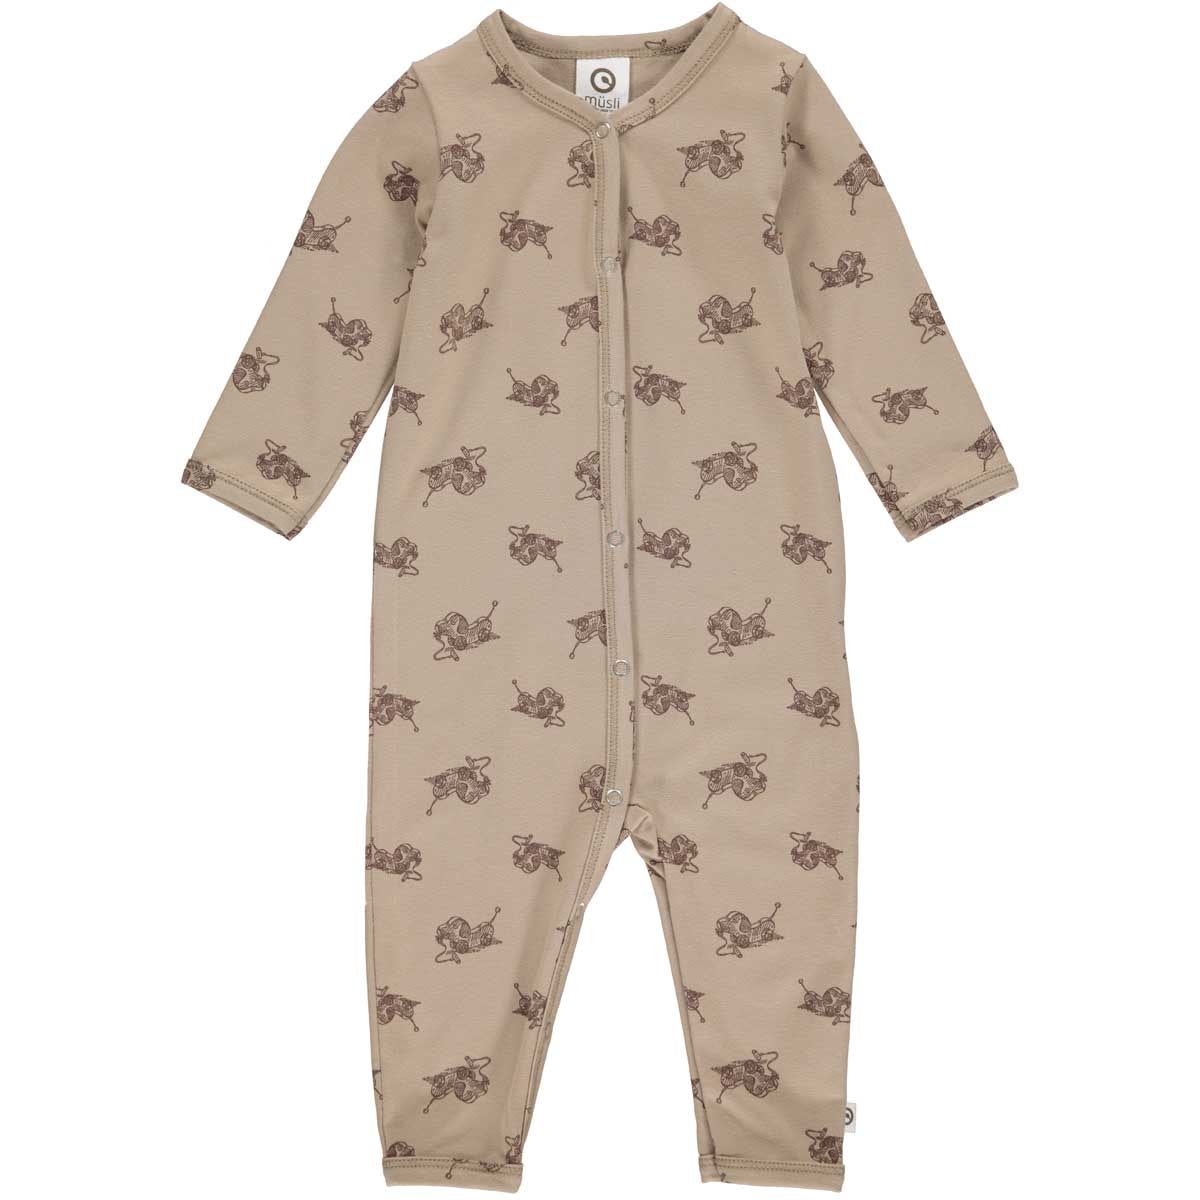 MAMA.LICIOUS Baby one-piece suit -Seed - 1584056900